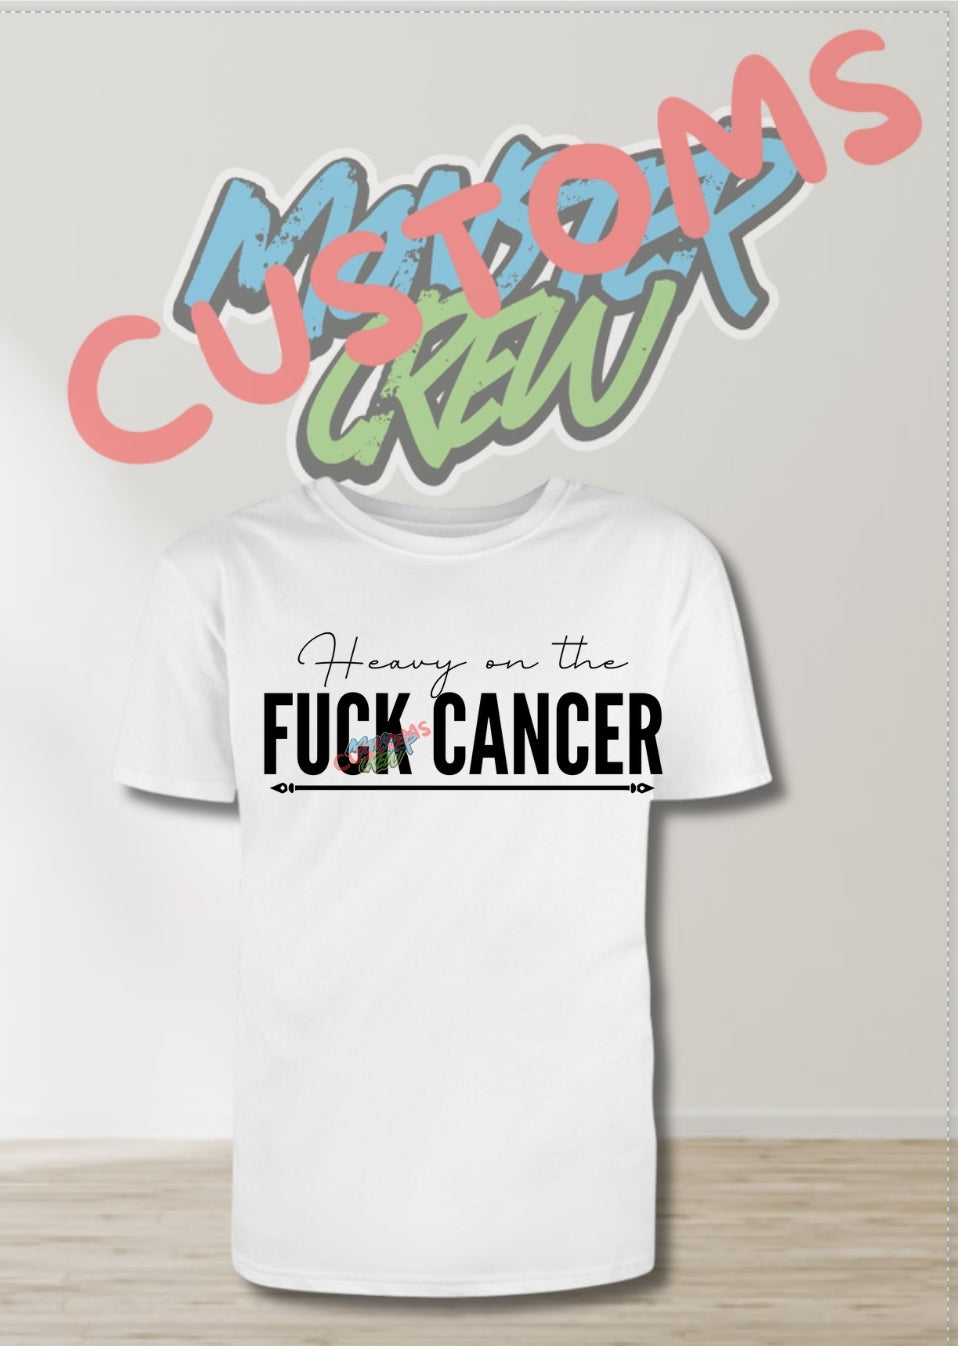 HEAVY ON THE FU** CANCER T-SHIRT